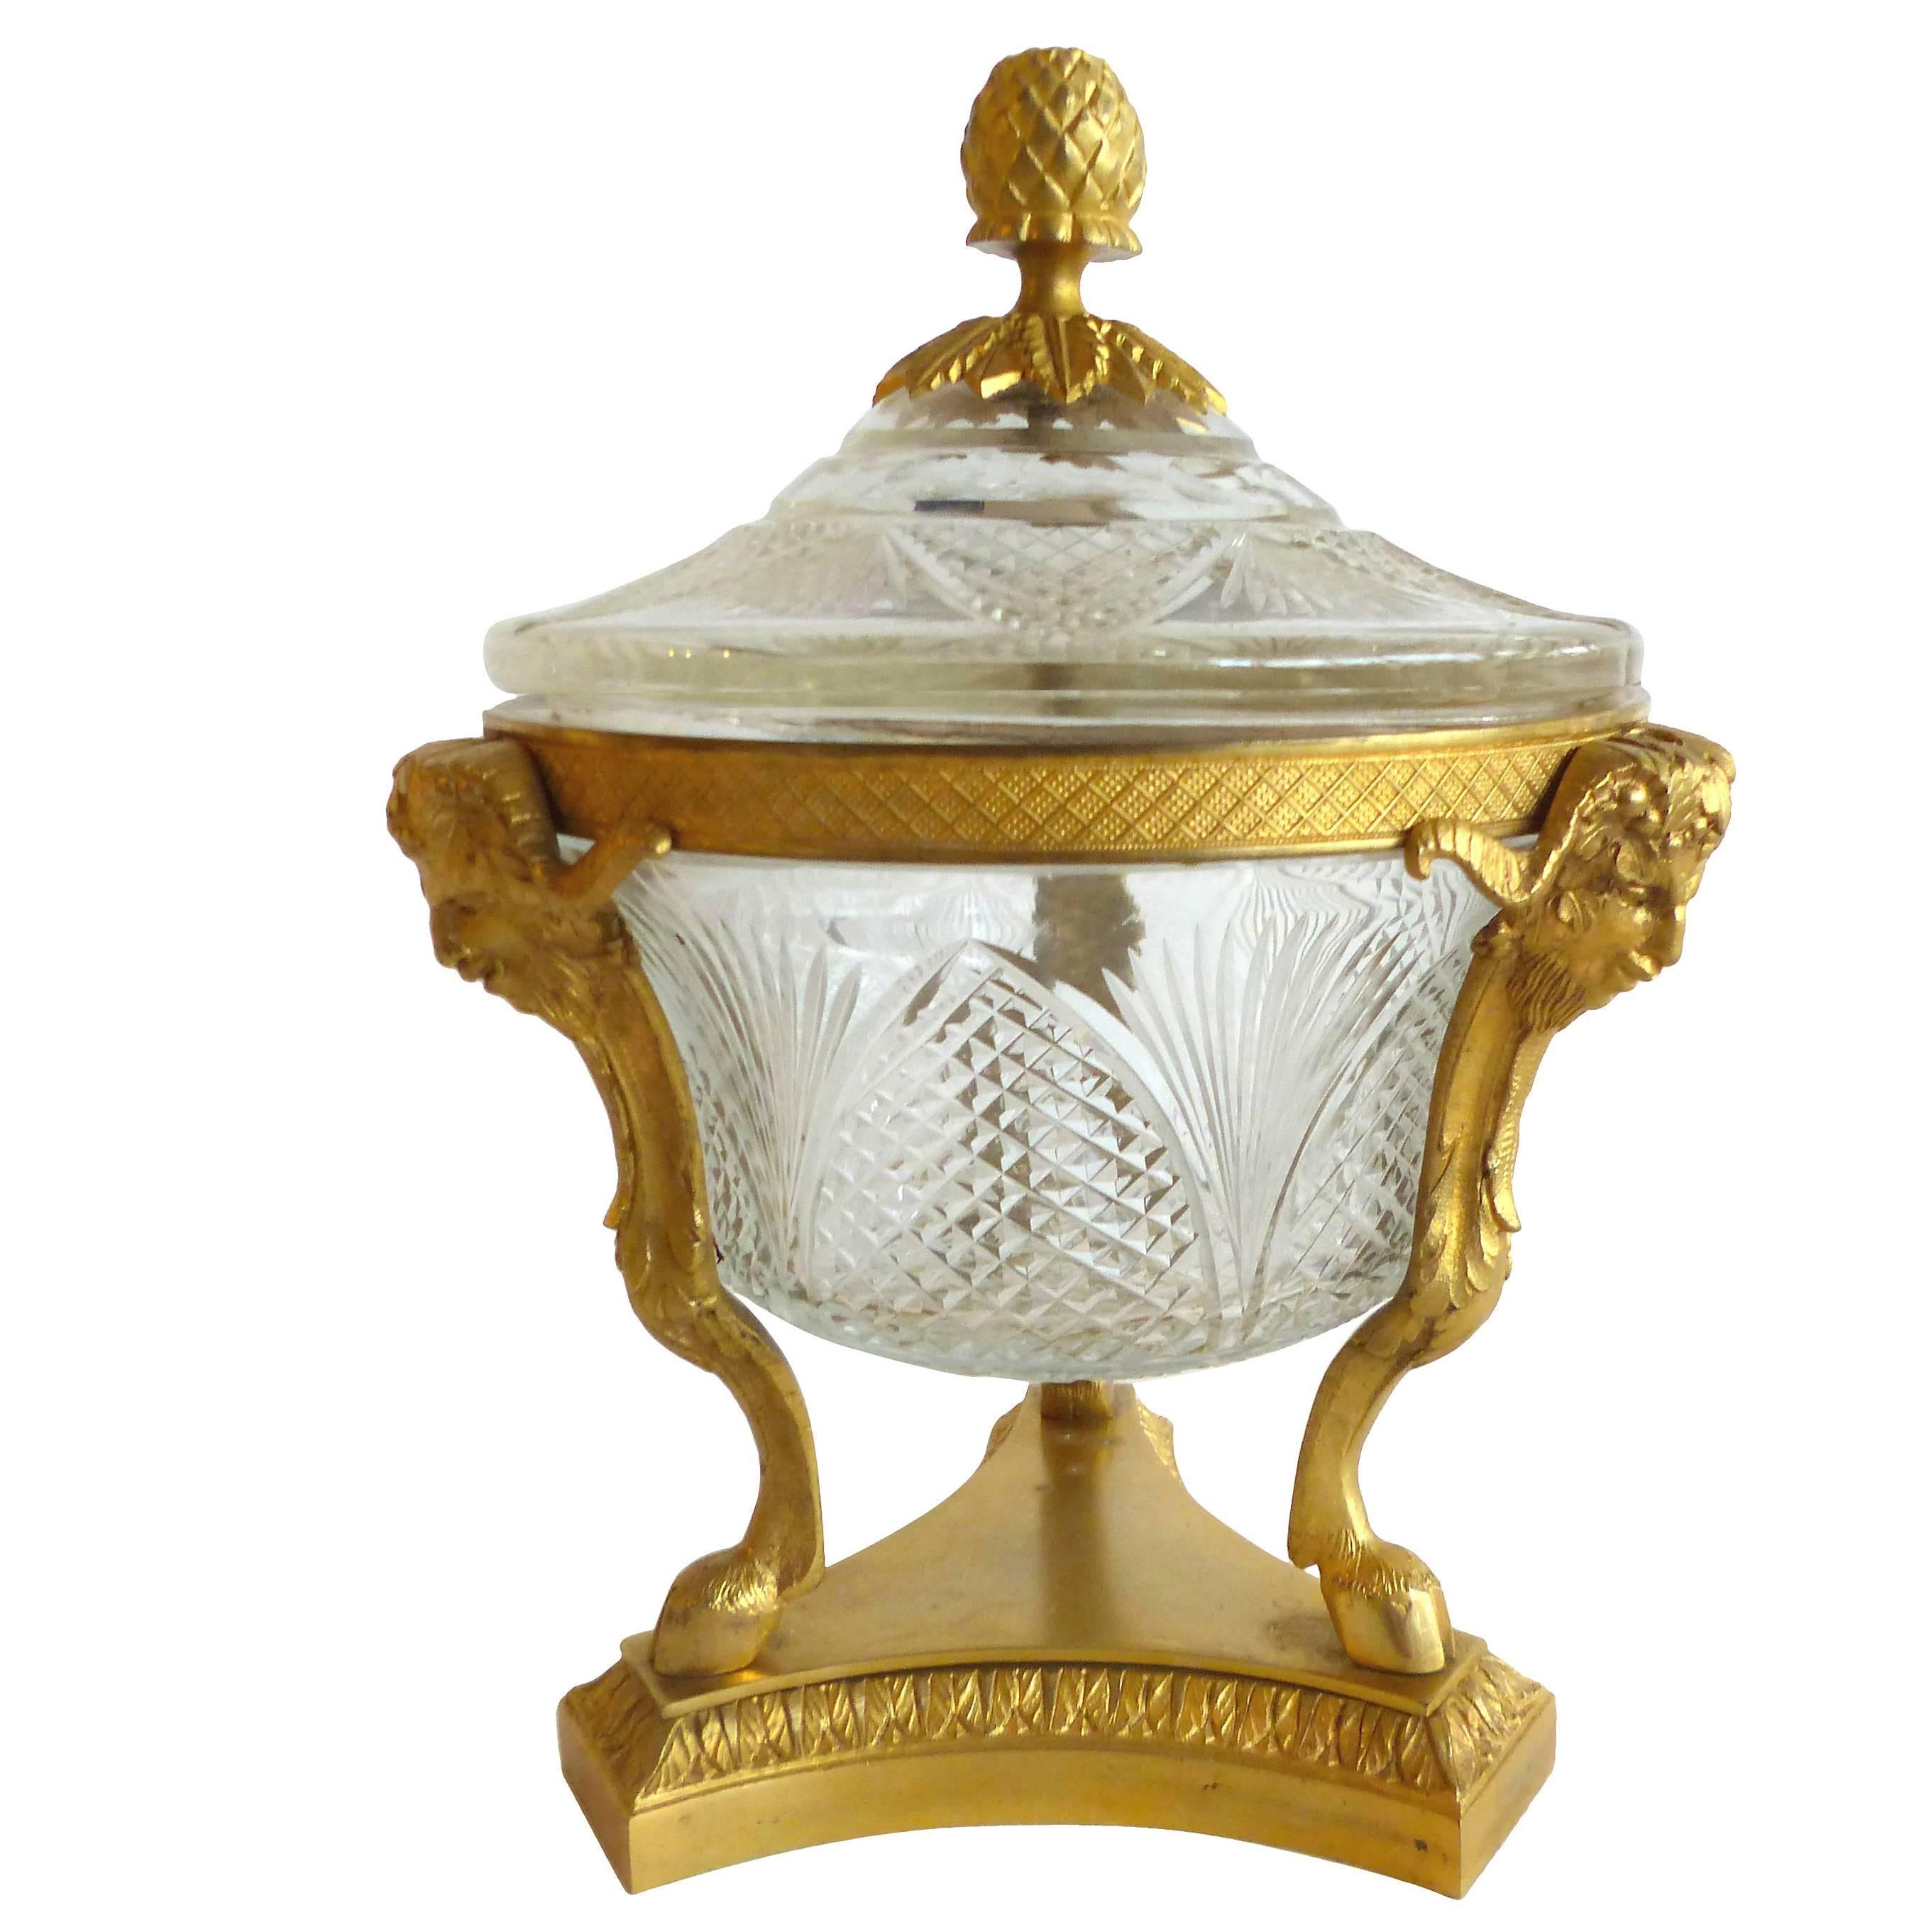 Early 20th-Century Neoclassical Revival Doré Bronze Covered Dish